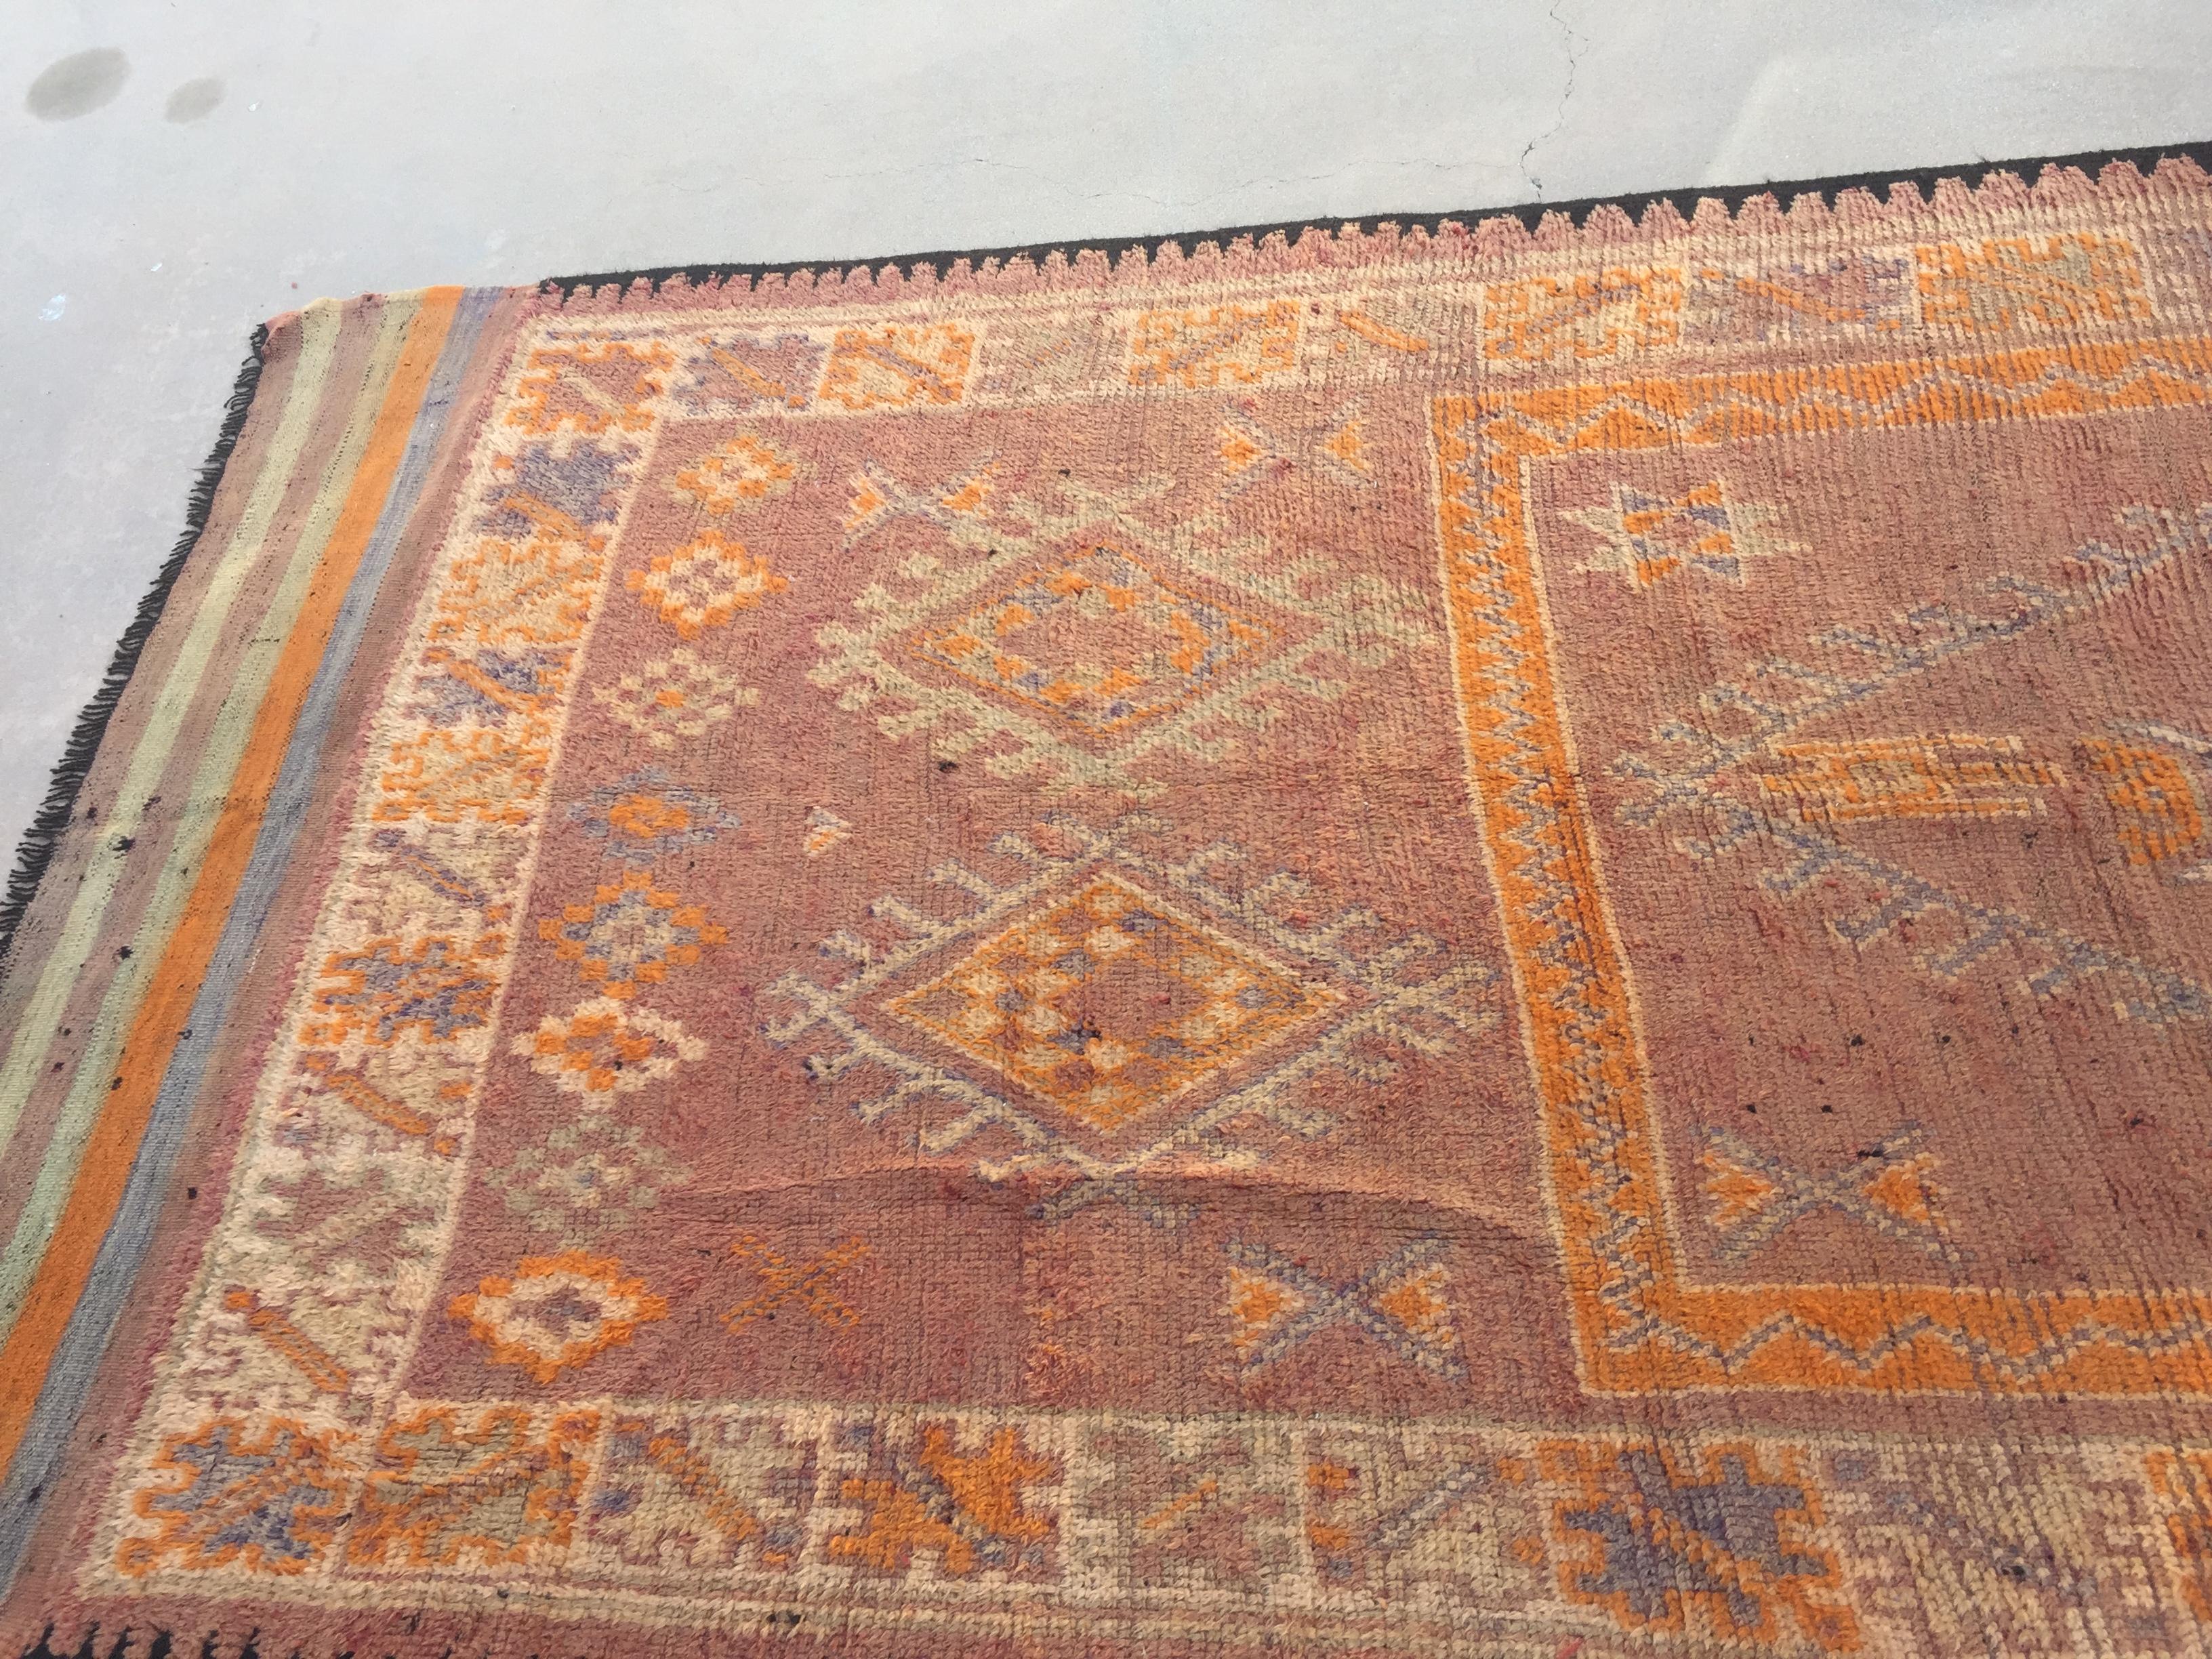 1940 authentic Handwoven vintage Moroccan Berber Tribal rug.Midcentury Moroccan area rug with tribal geometric design.Handwoven by The Berber tribes in Morocco with traditional geometric tribal designs.South of Marrakech low pile rug runner.Great to